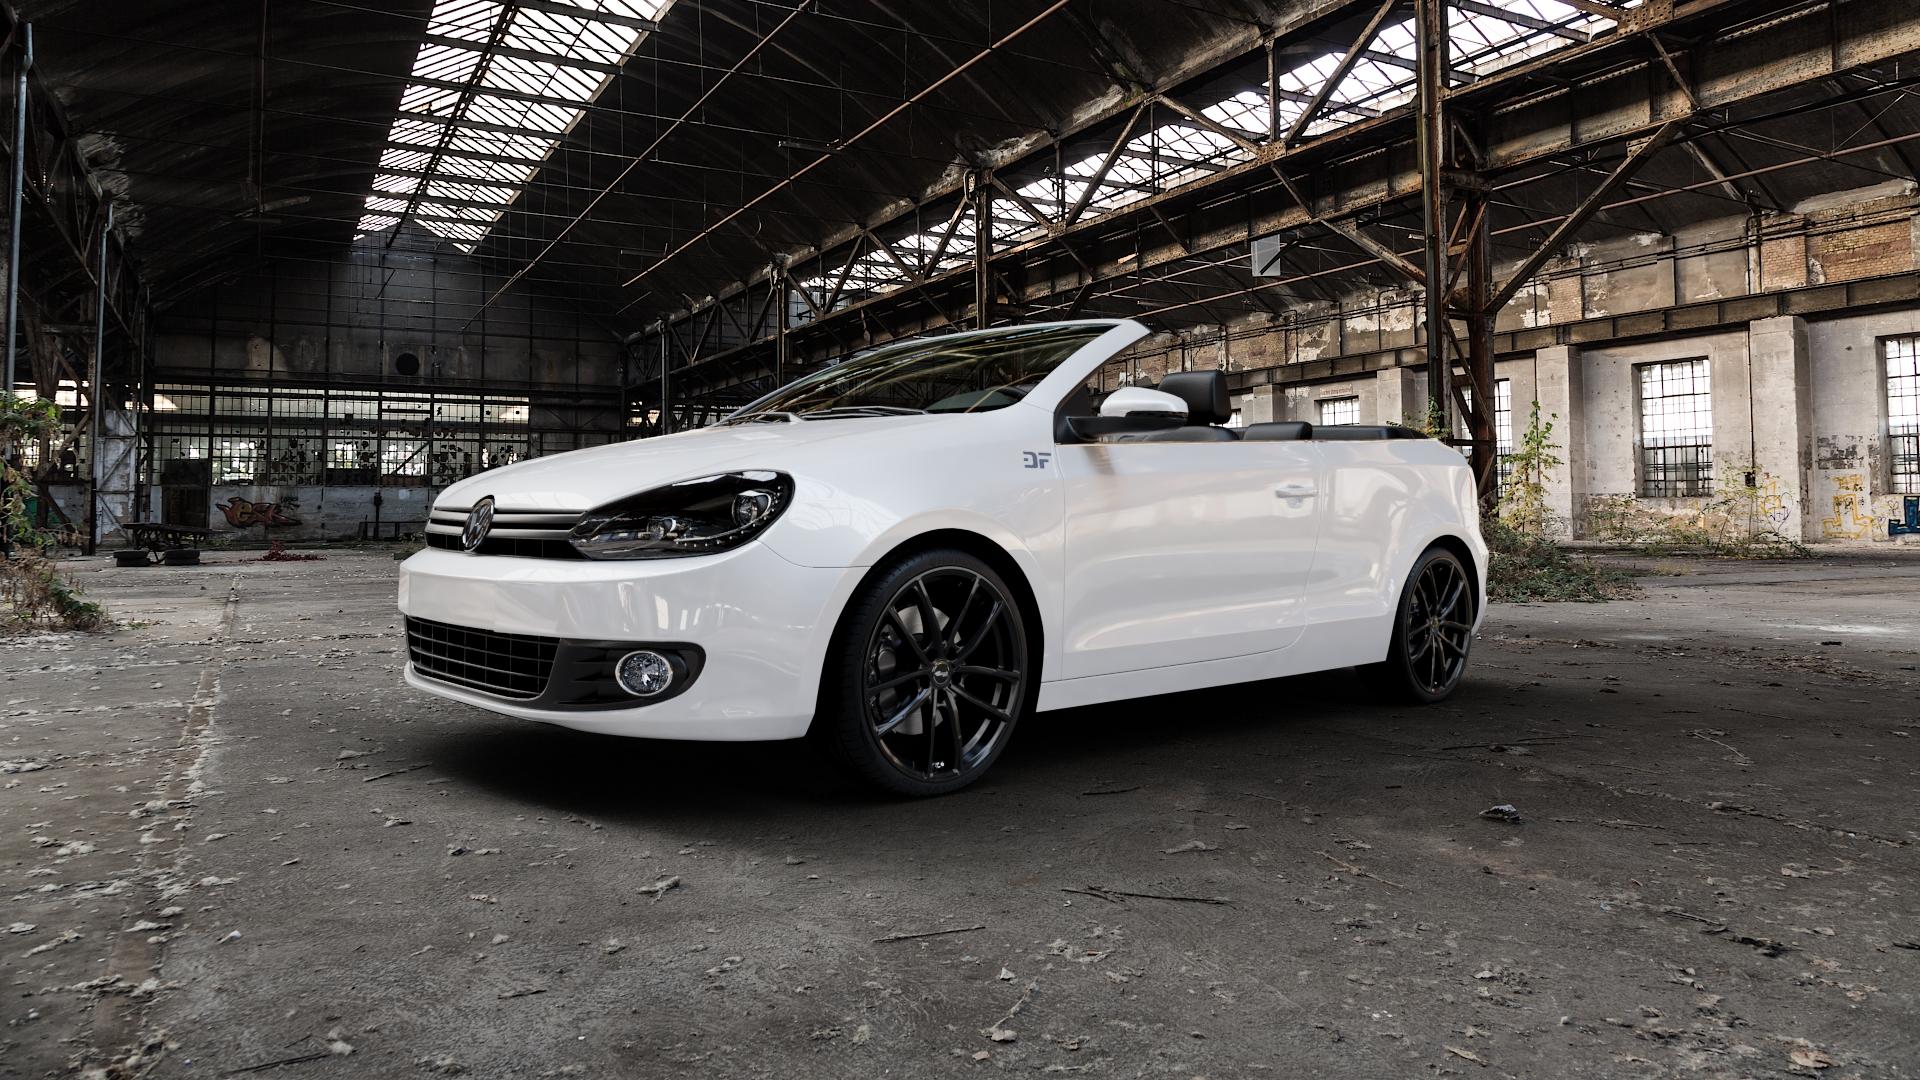 Volkswagen (VW) Golf 6 Cabrio 2,0l TSI 195kW R (265 hp) Wheels and Tyre  Packages | velonity.com